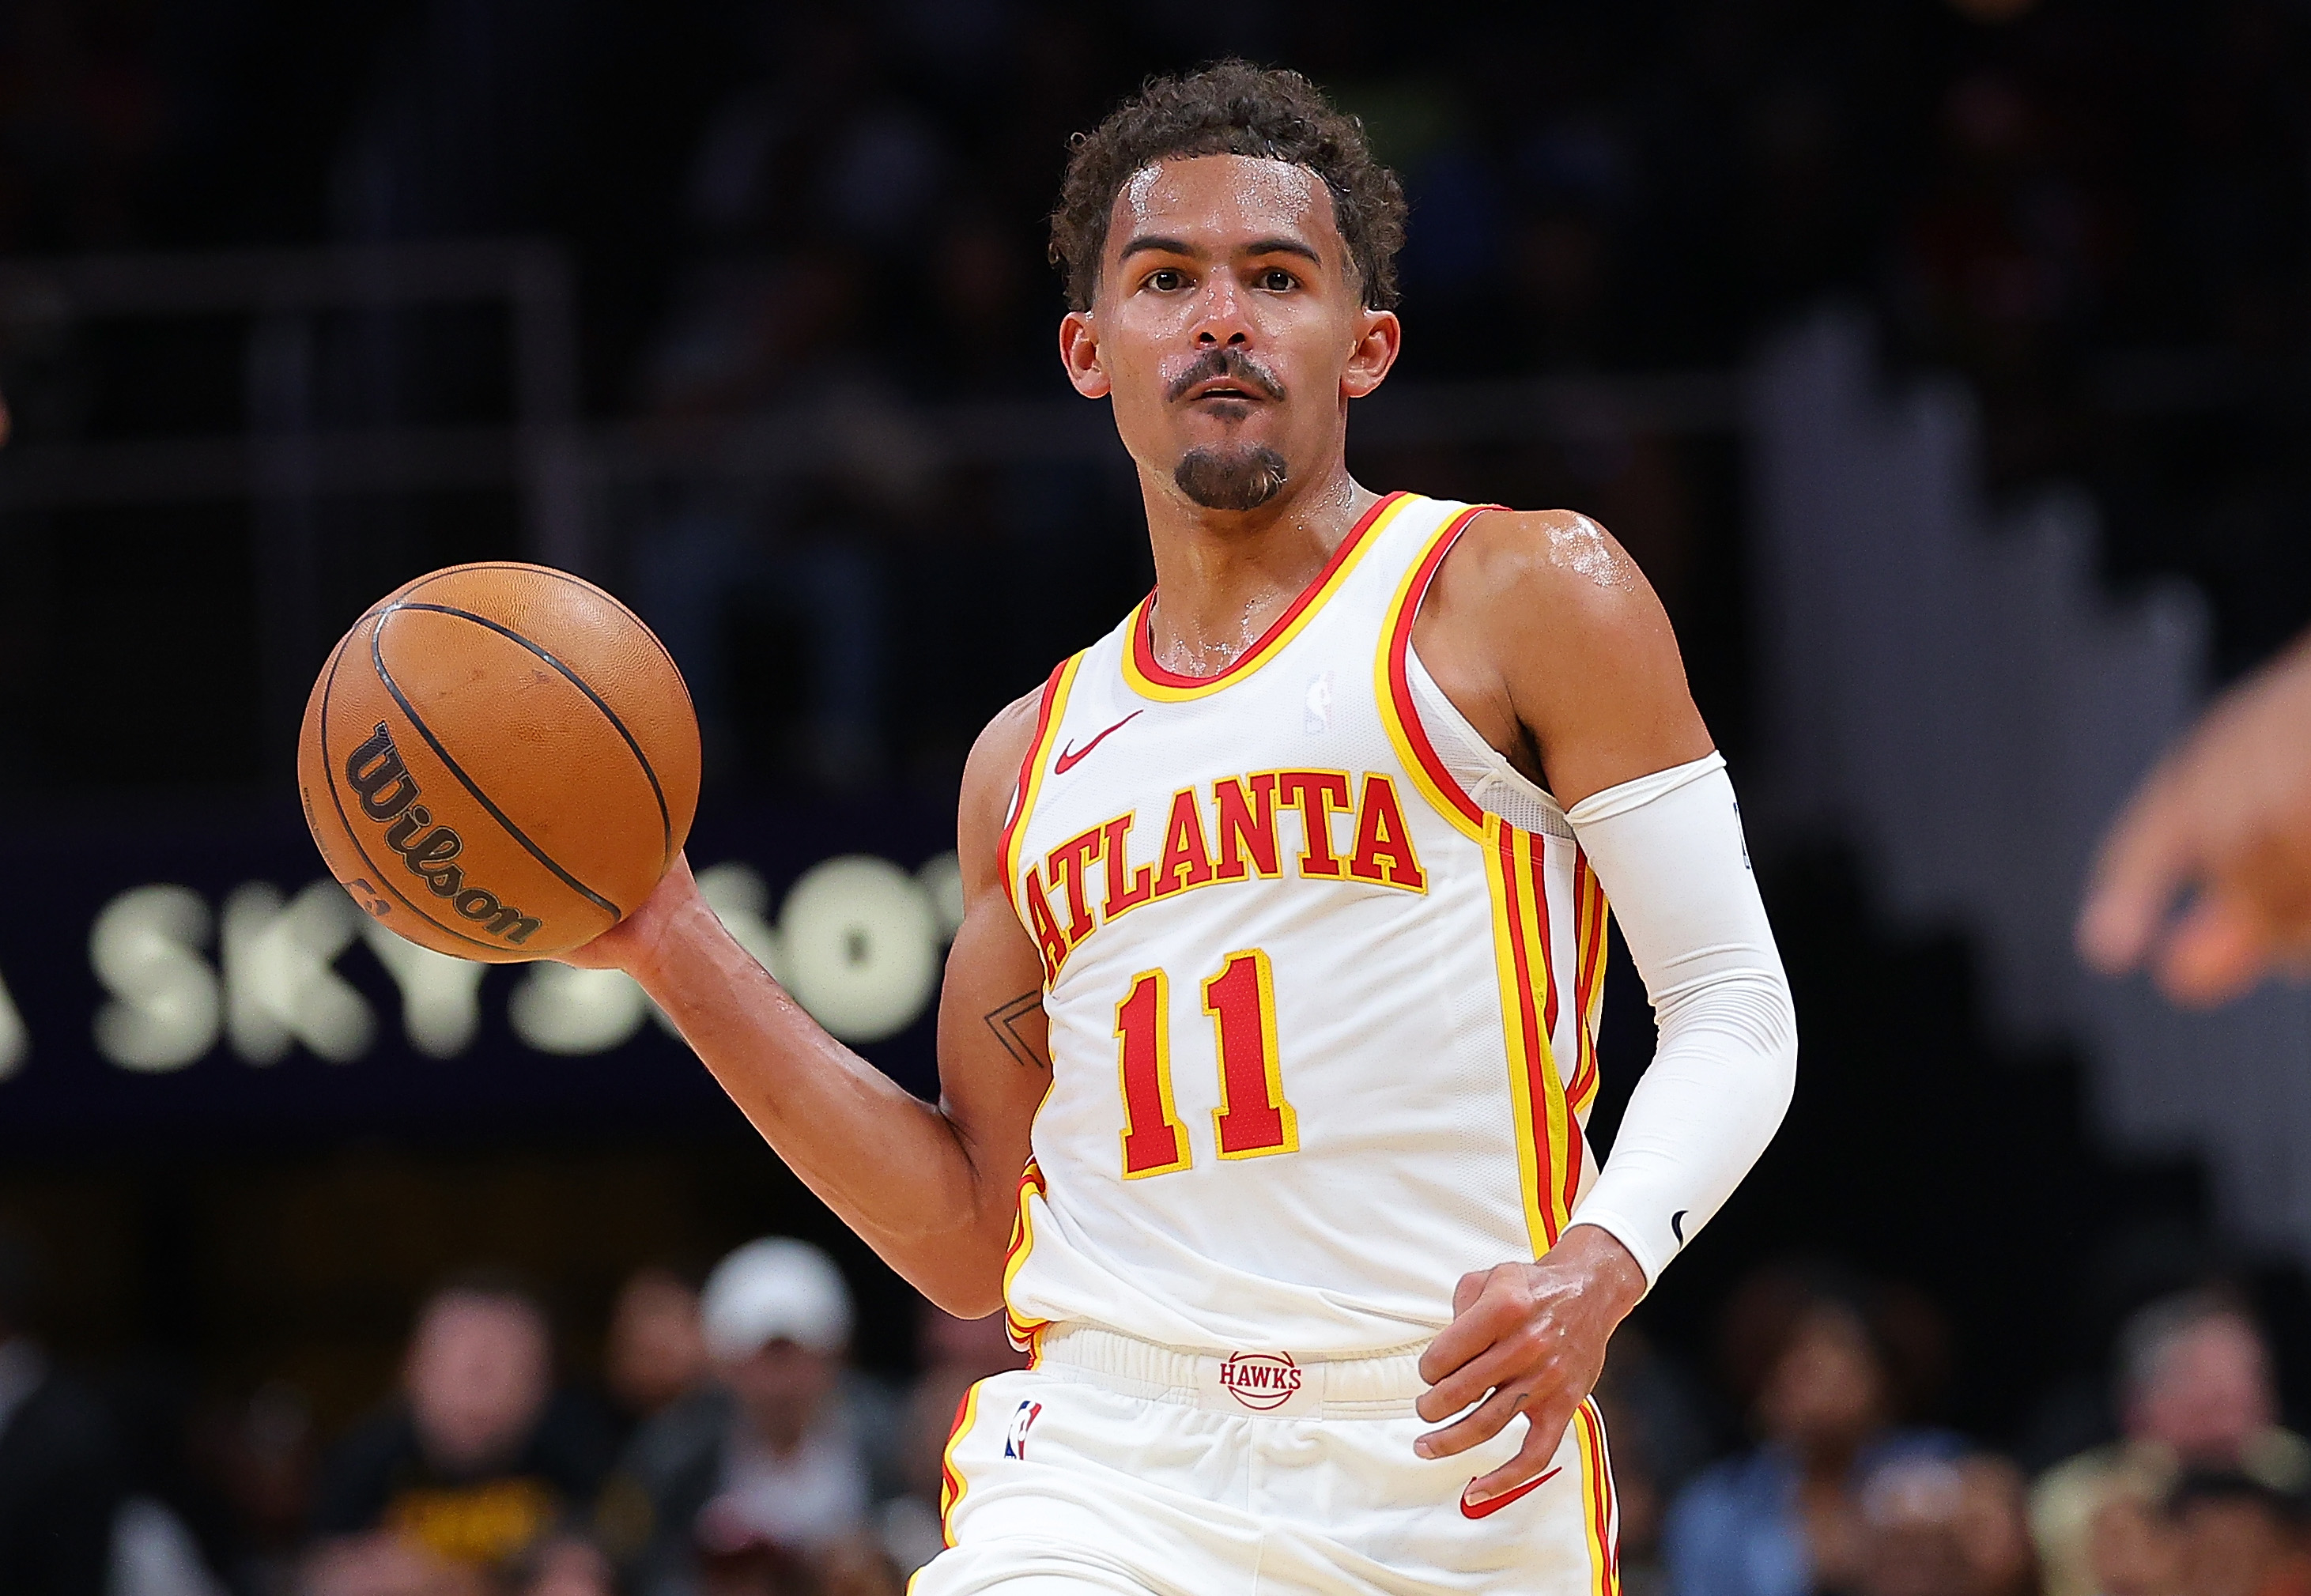 The Top 30 Best NBA Players for the 2023-24 Season